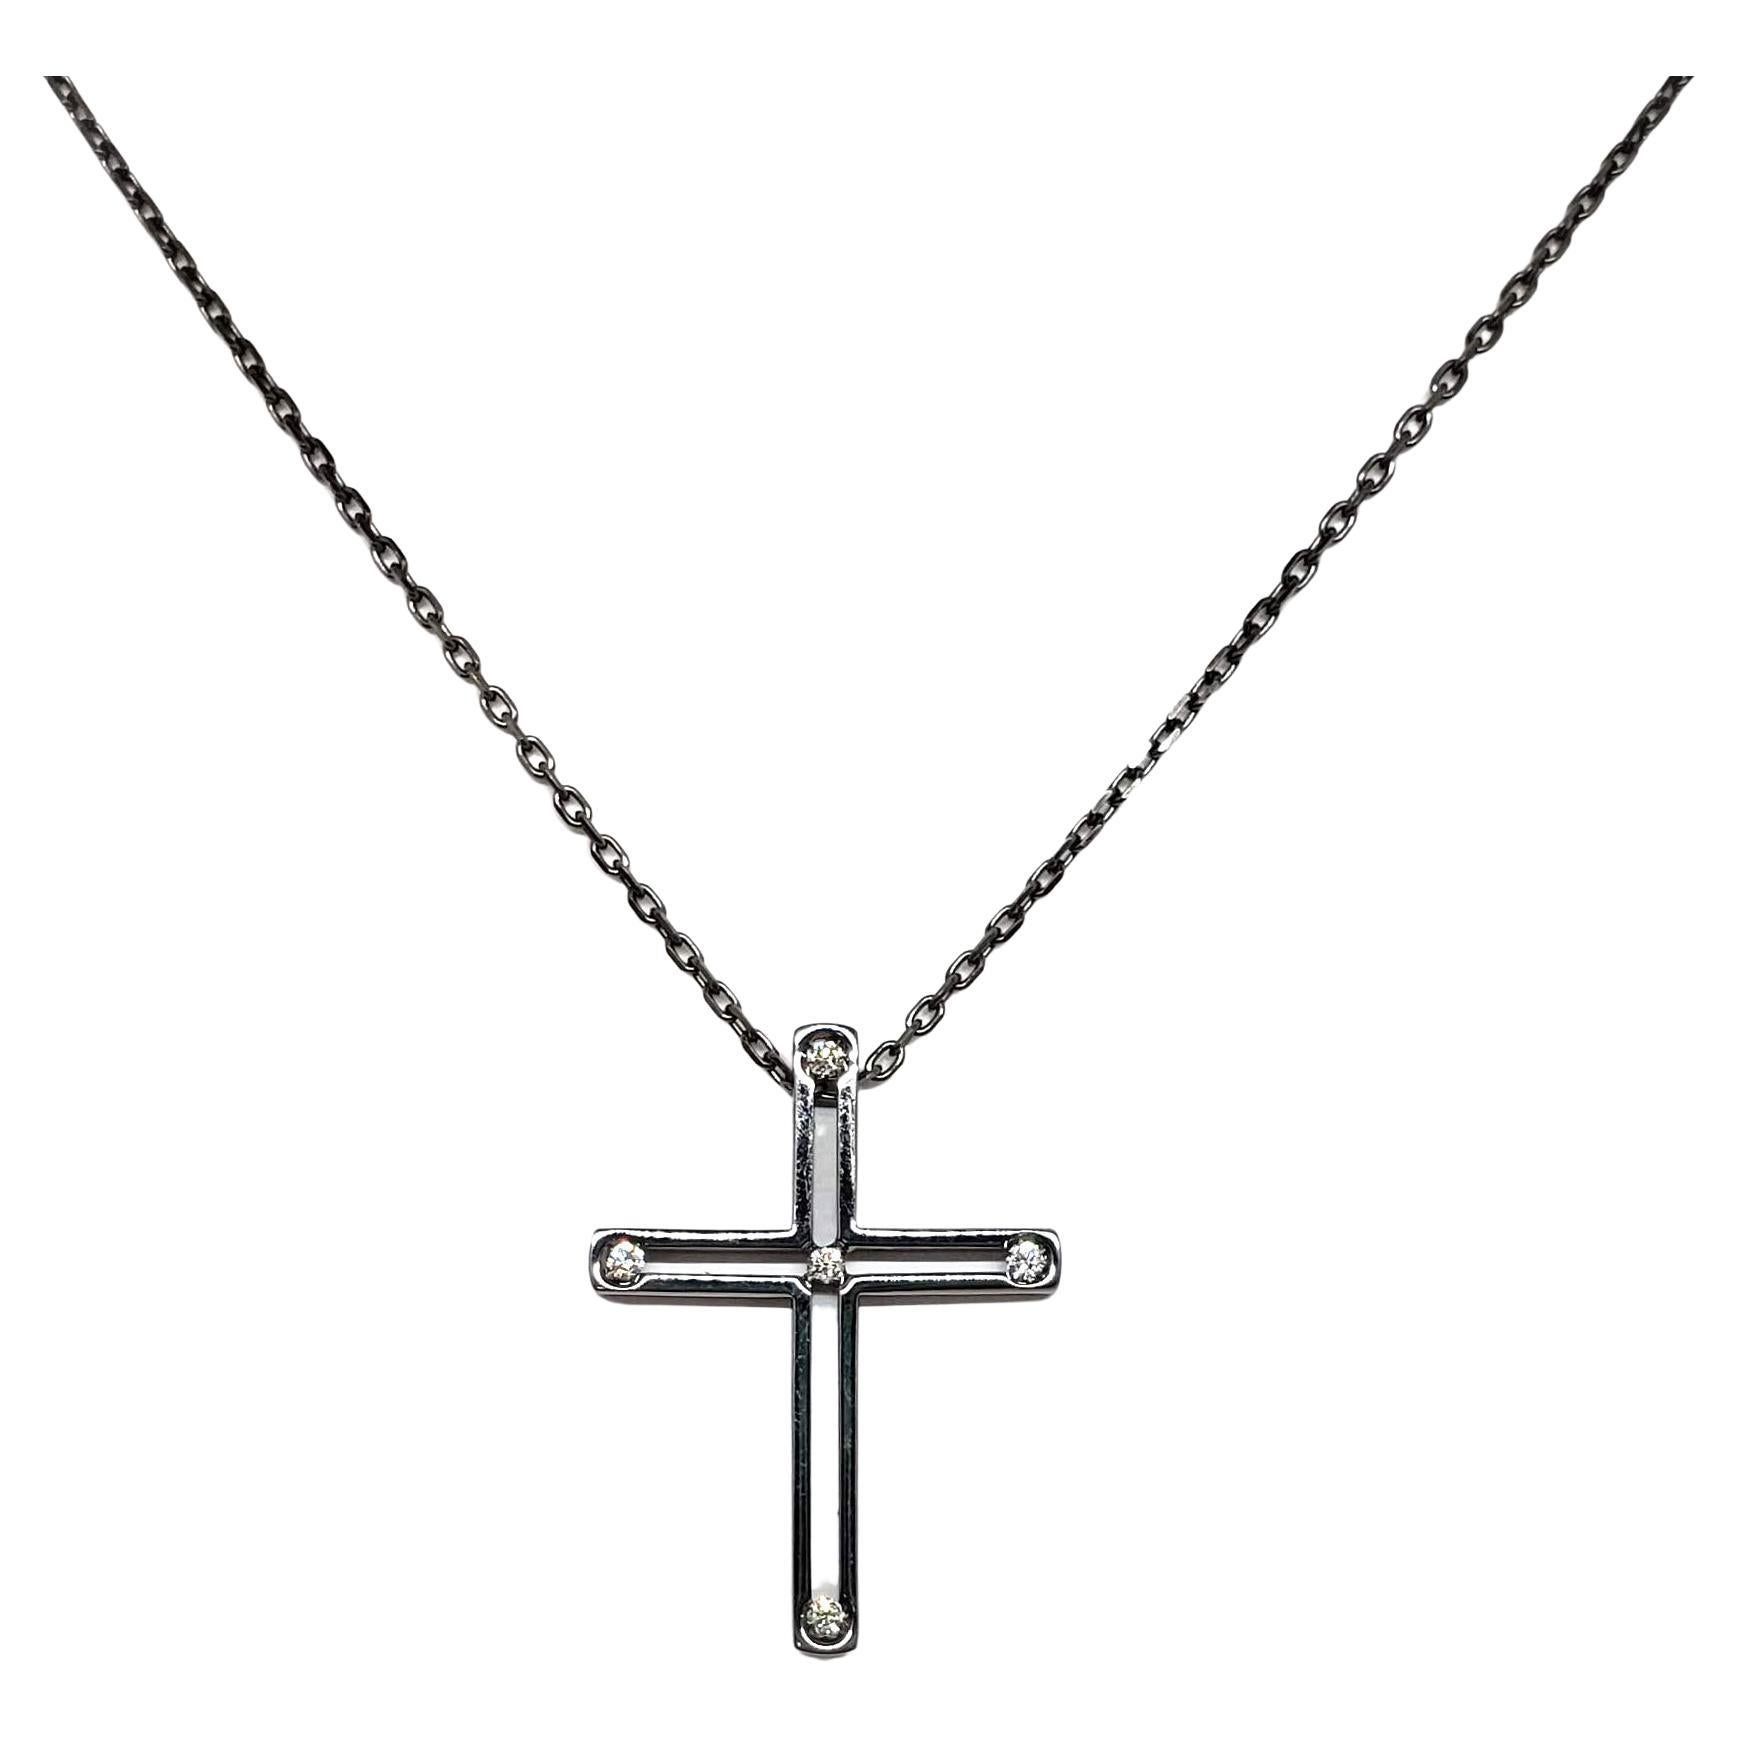 Damiani Black Cross Pendant with 18k Gold and Diamonds, 20031604 For Sale